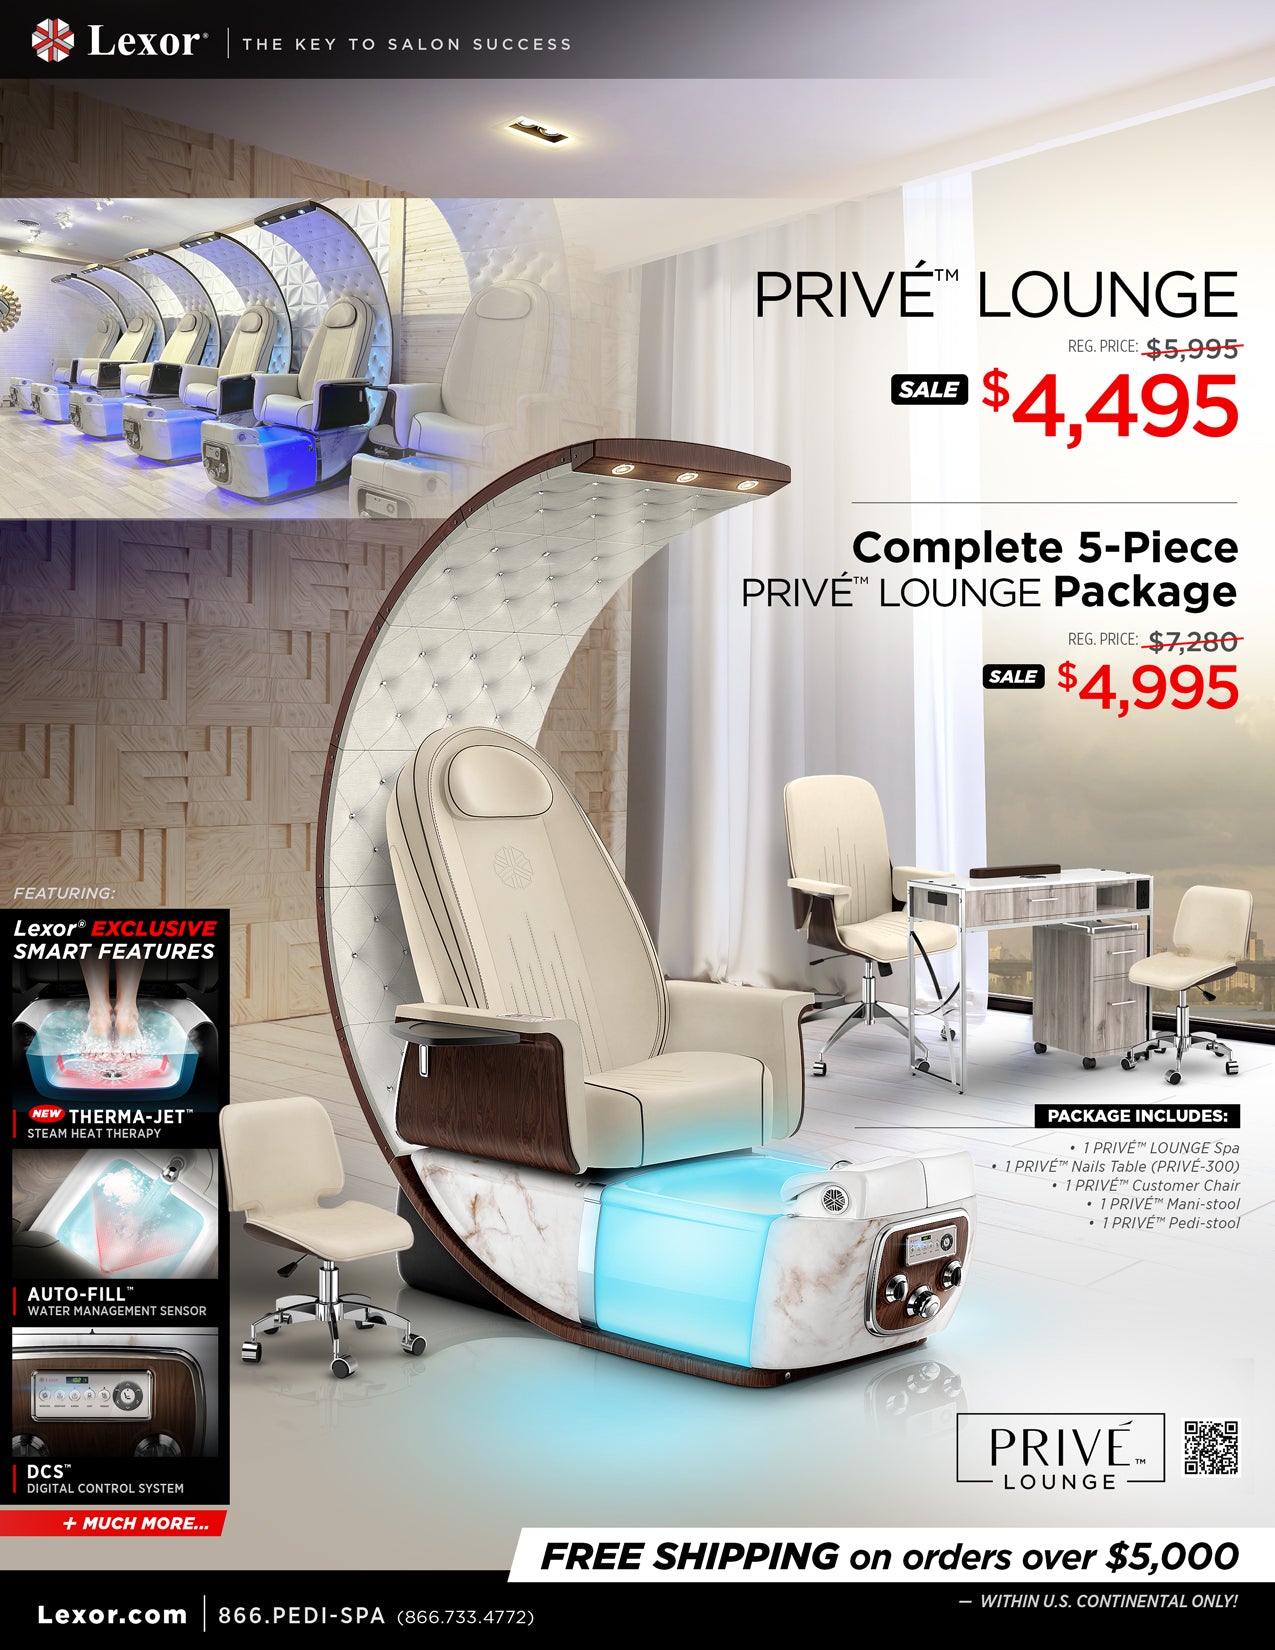 PRIVE Lounge Package Deal!